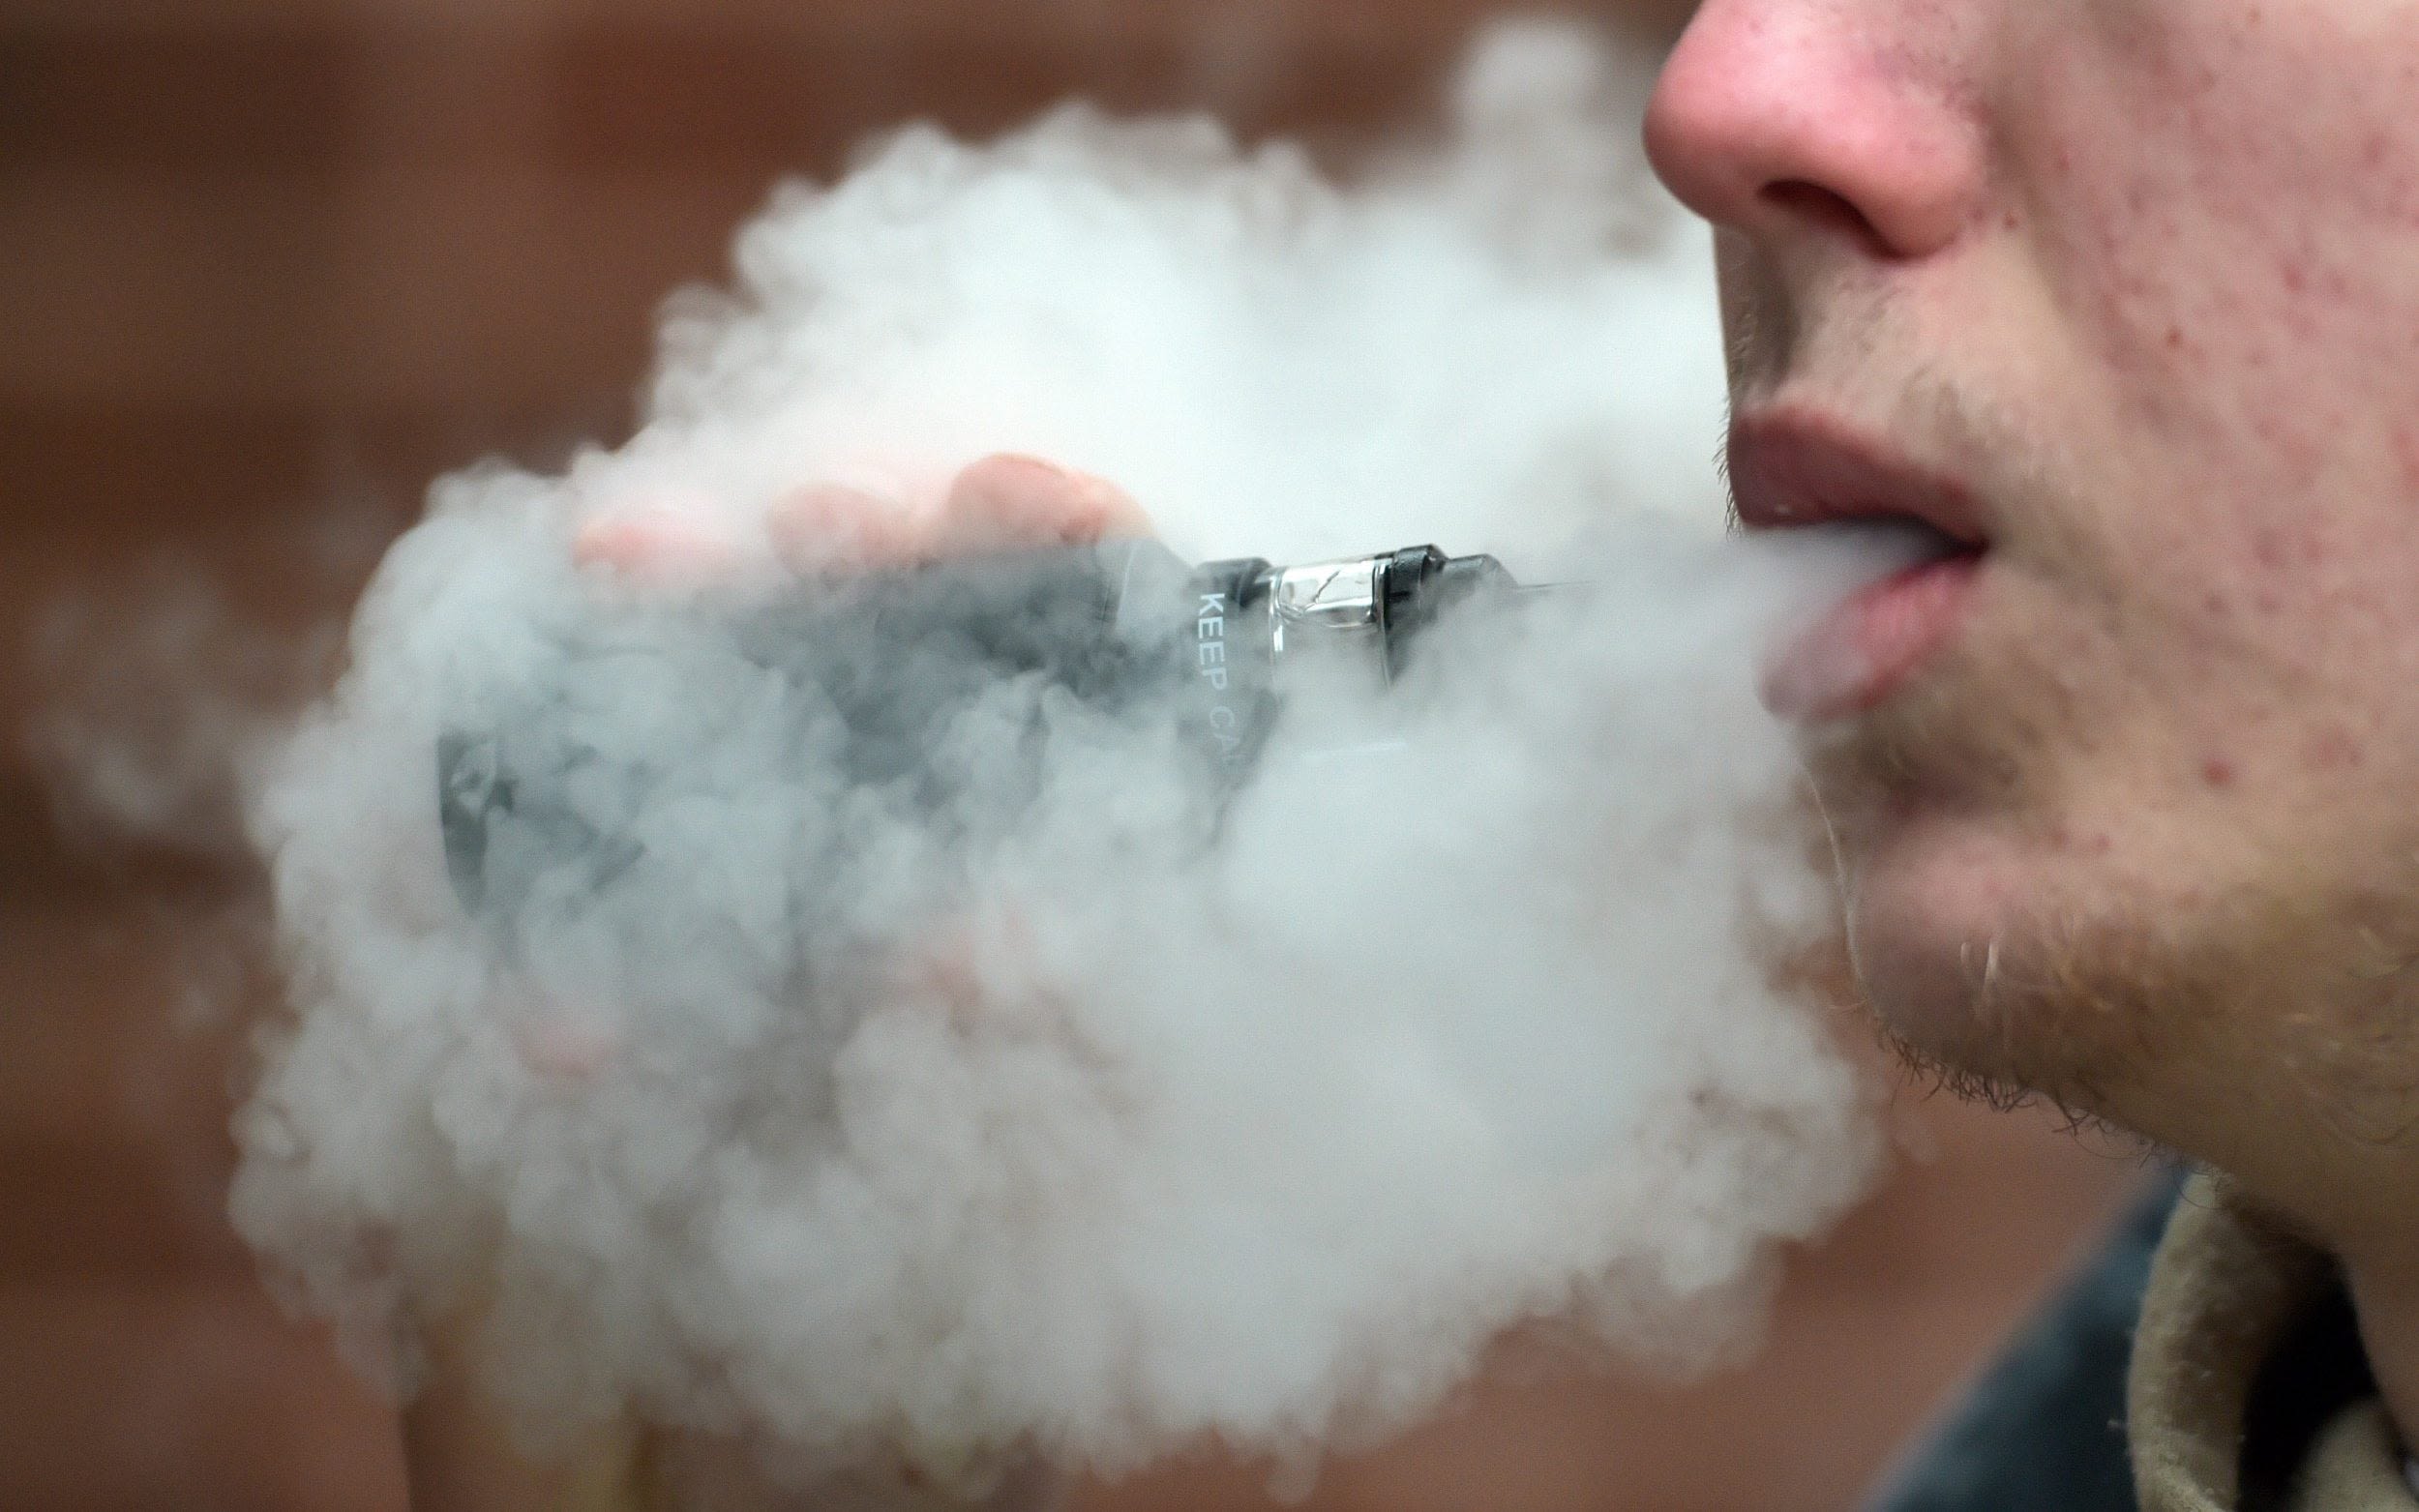 Quarter of 18-year-olds are now long-term vapers